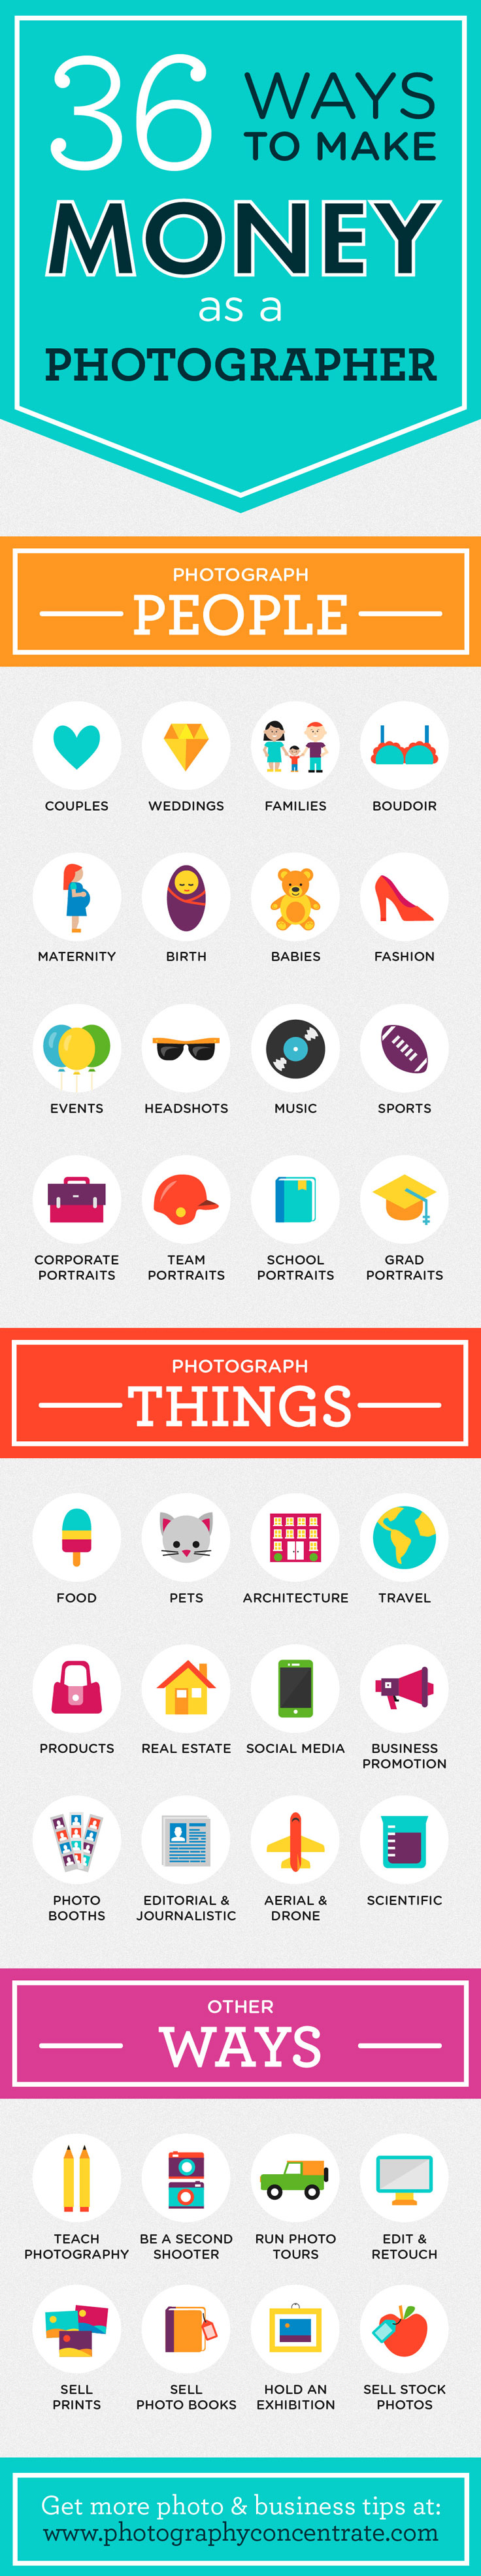 infographic-31-ways-to-make-money-as-a-photographer